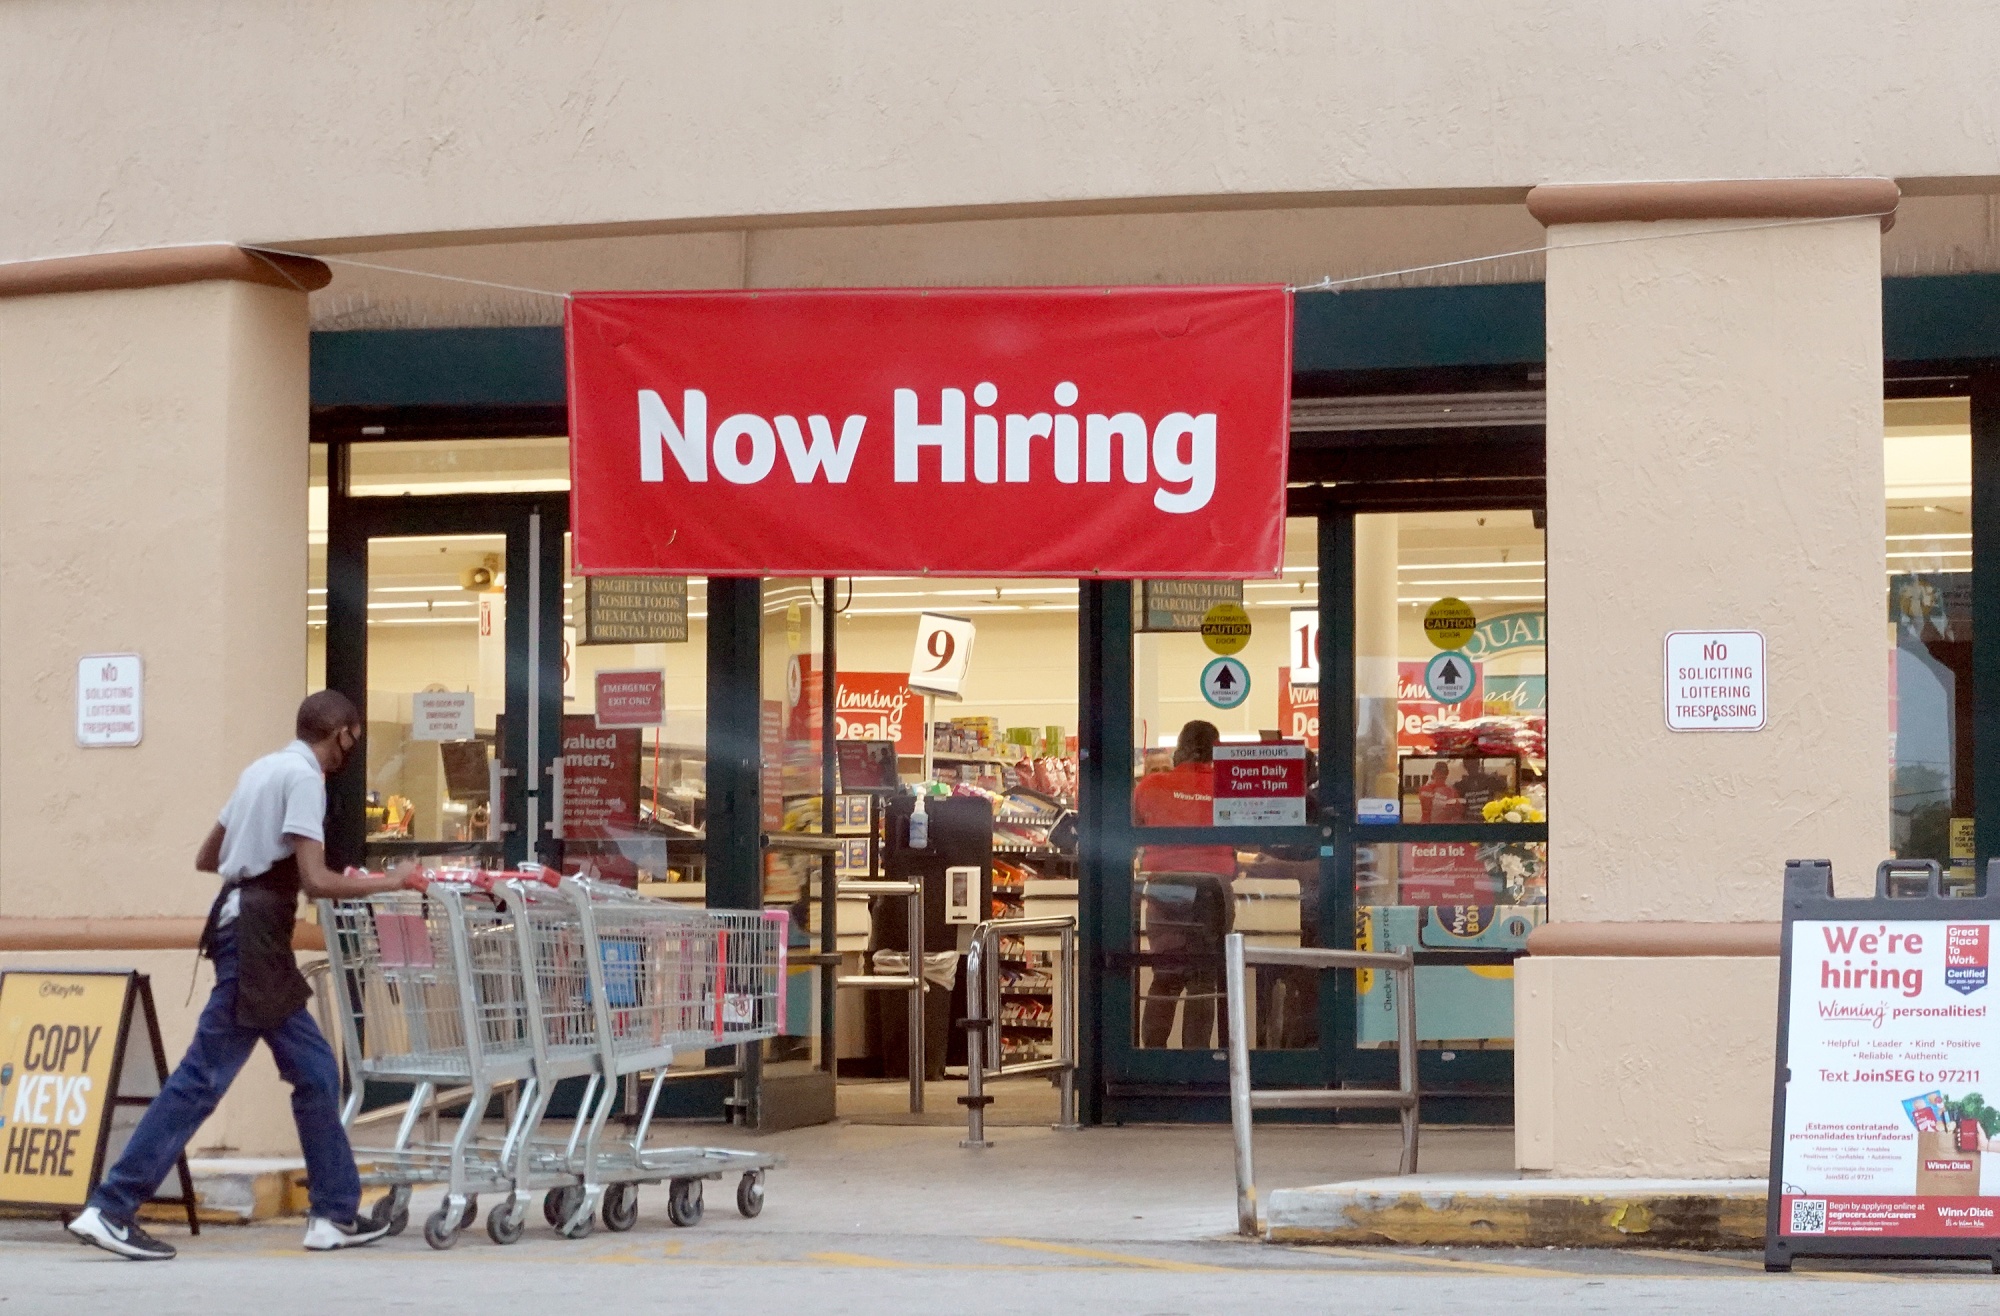 US Job Openings Unexpectedly Surge to More Than 11 Million - Bloomberg